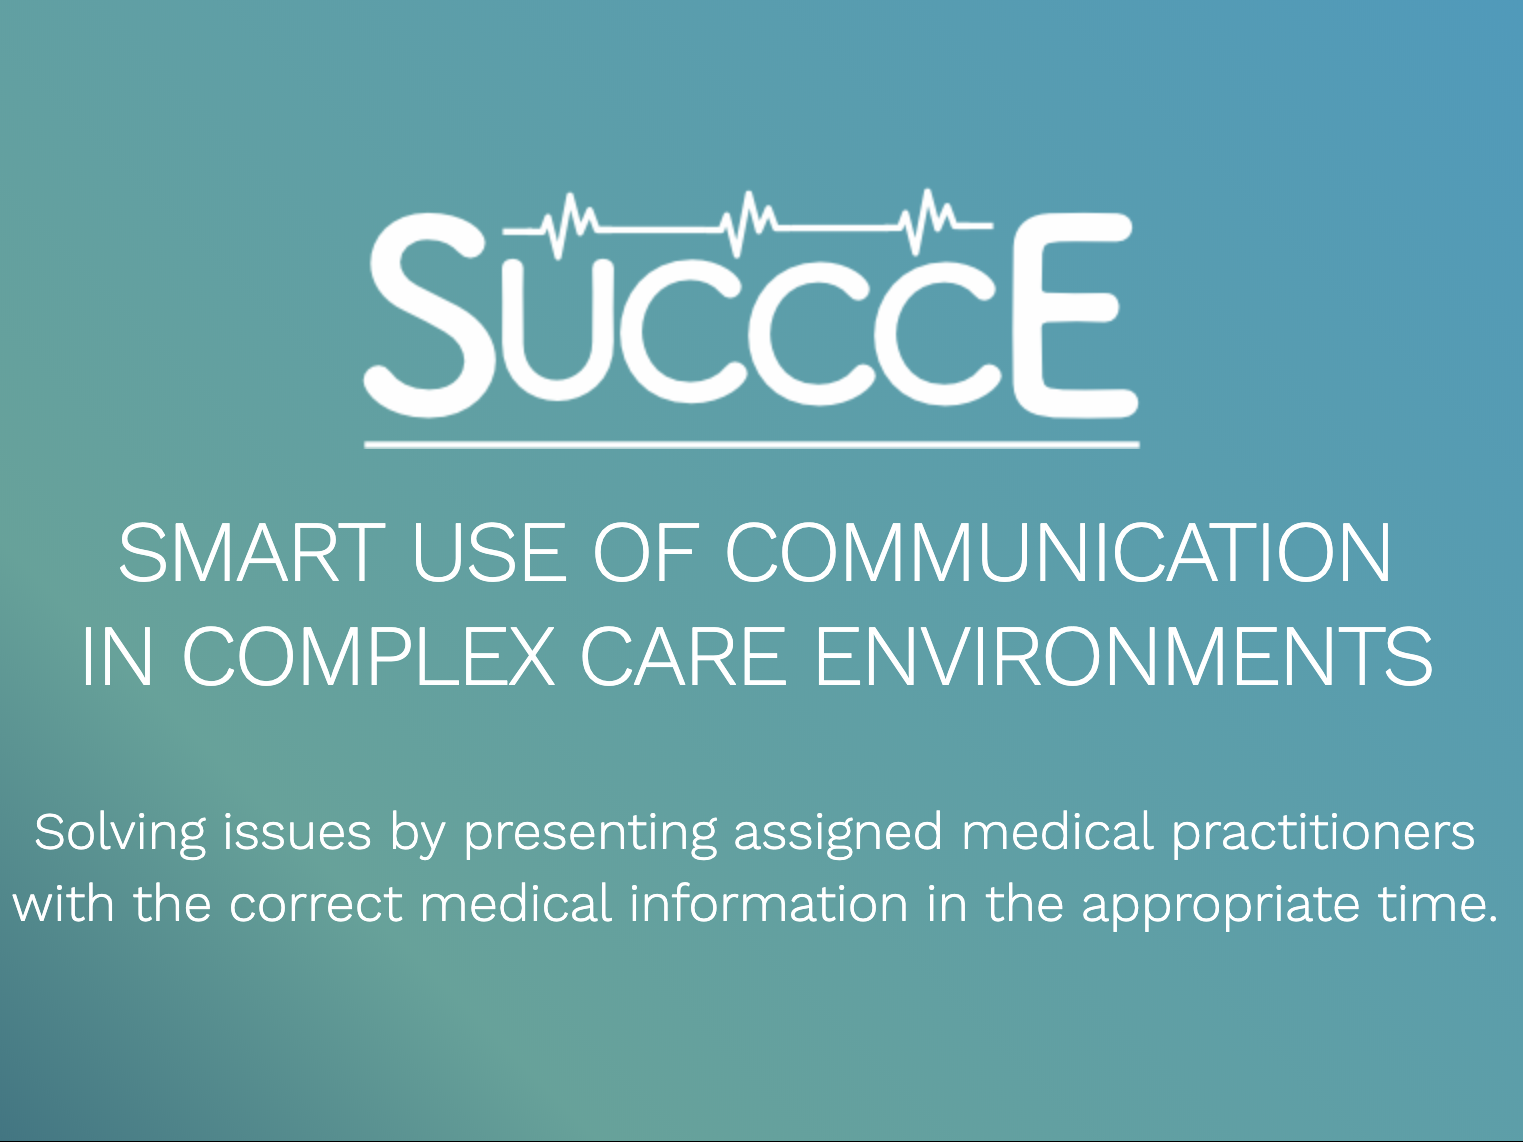 SUCCCE – Smart use of communication in complex care environments